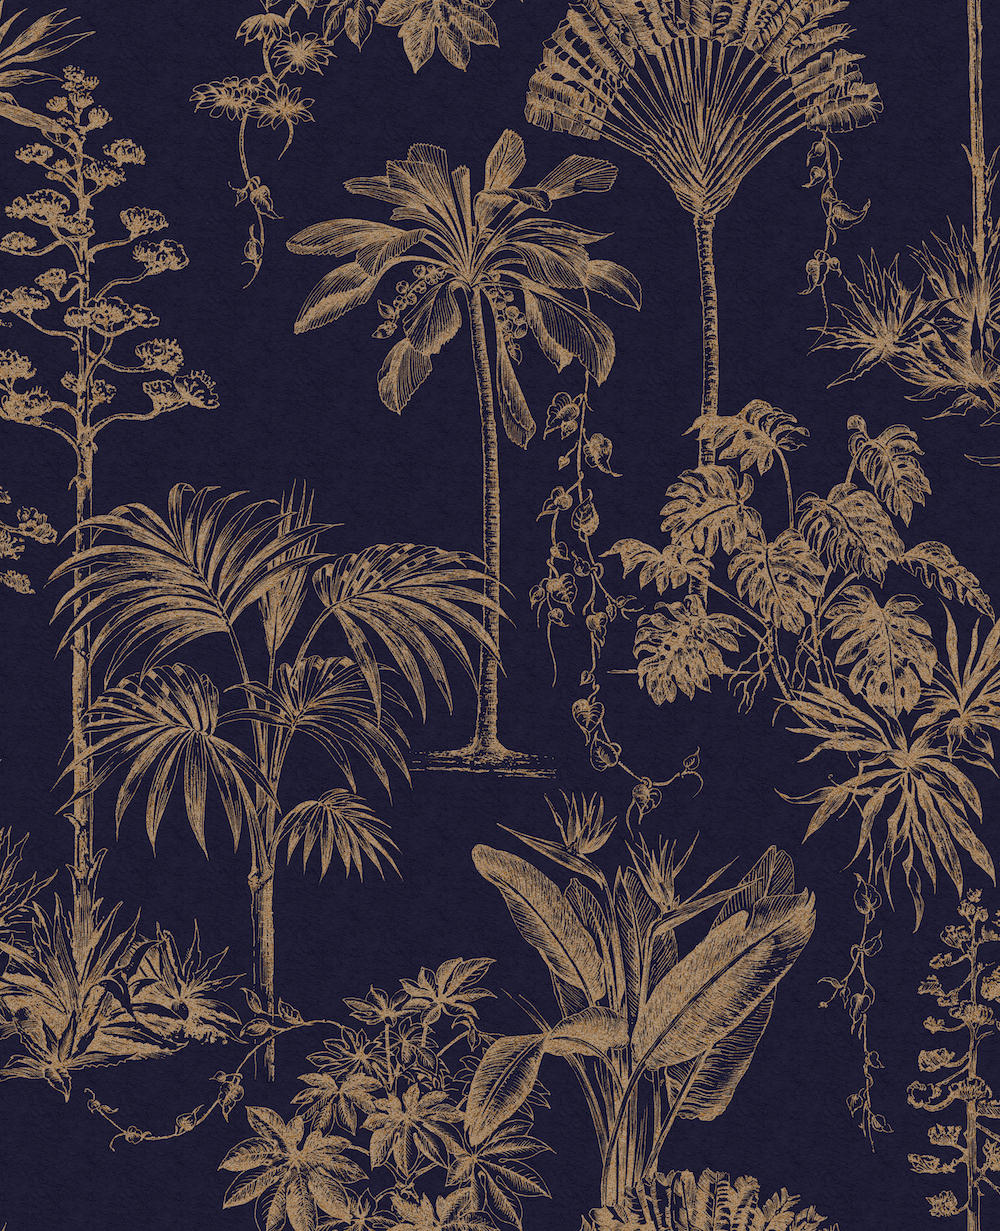 104100 Palm Leaves In Navy Blue - Tropical Palm Tree Print - HD Wallpaper 